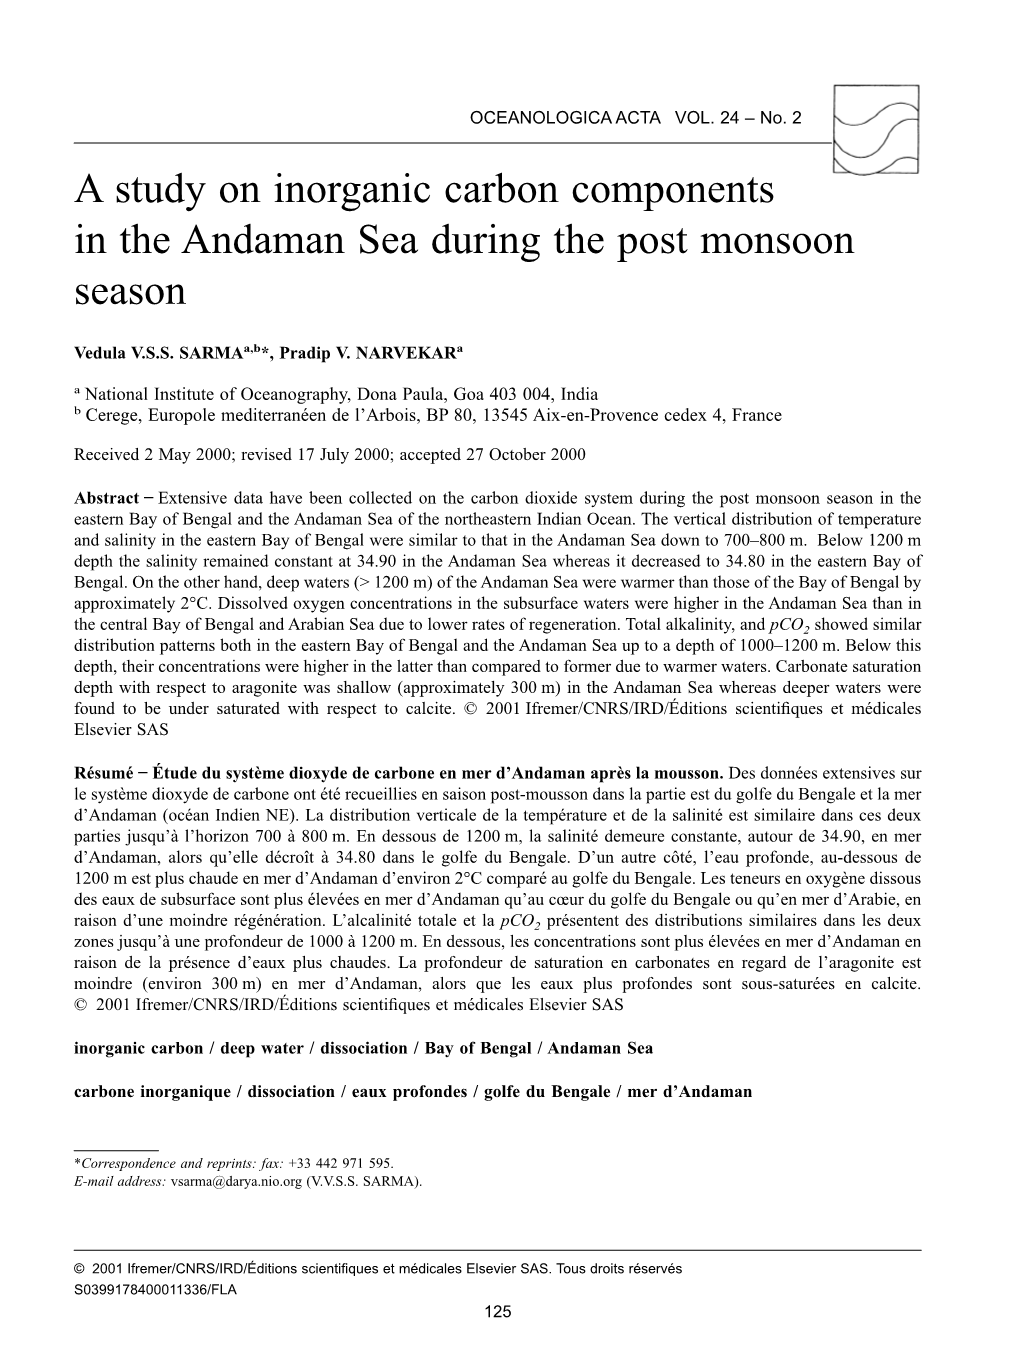 A Study on Inorganic Carbon Components in the Andaman Sea During the Post Monsoon Season